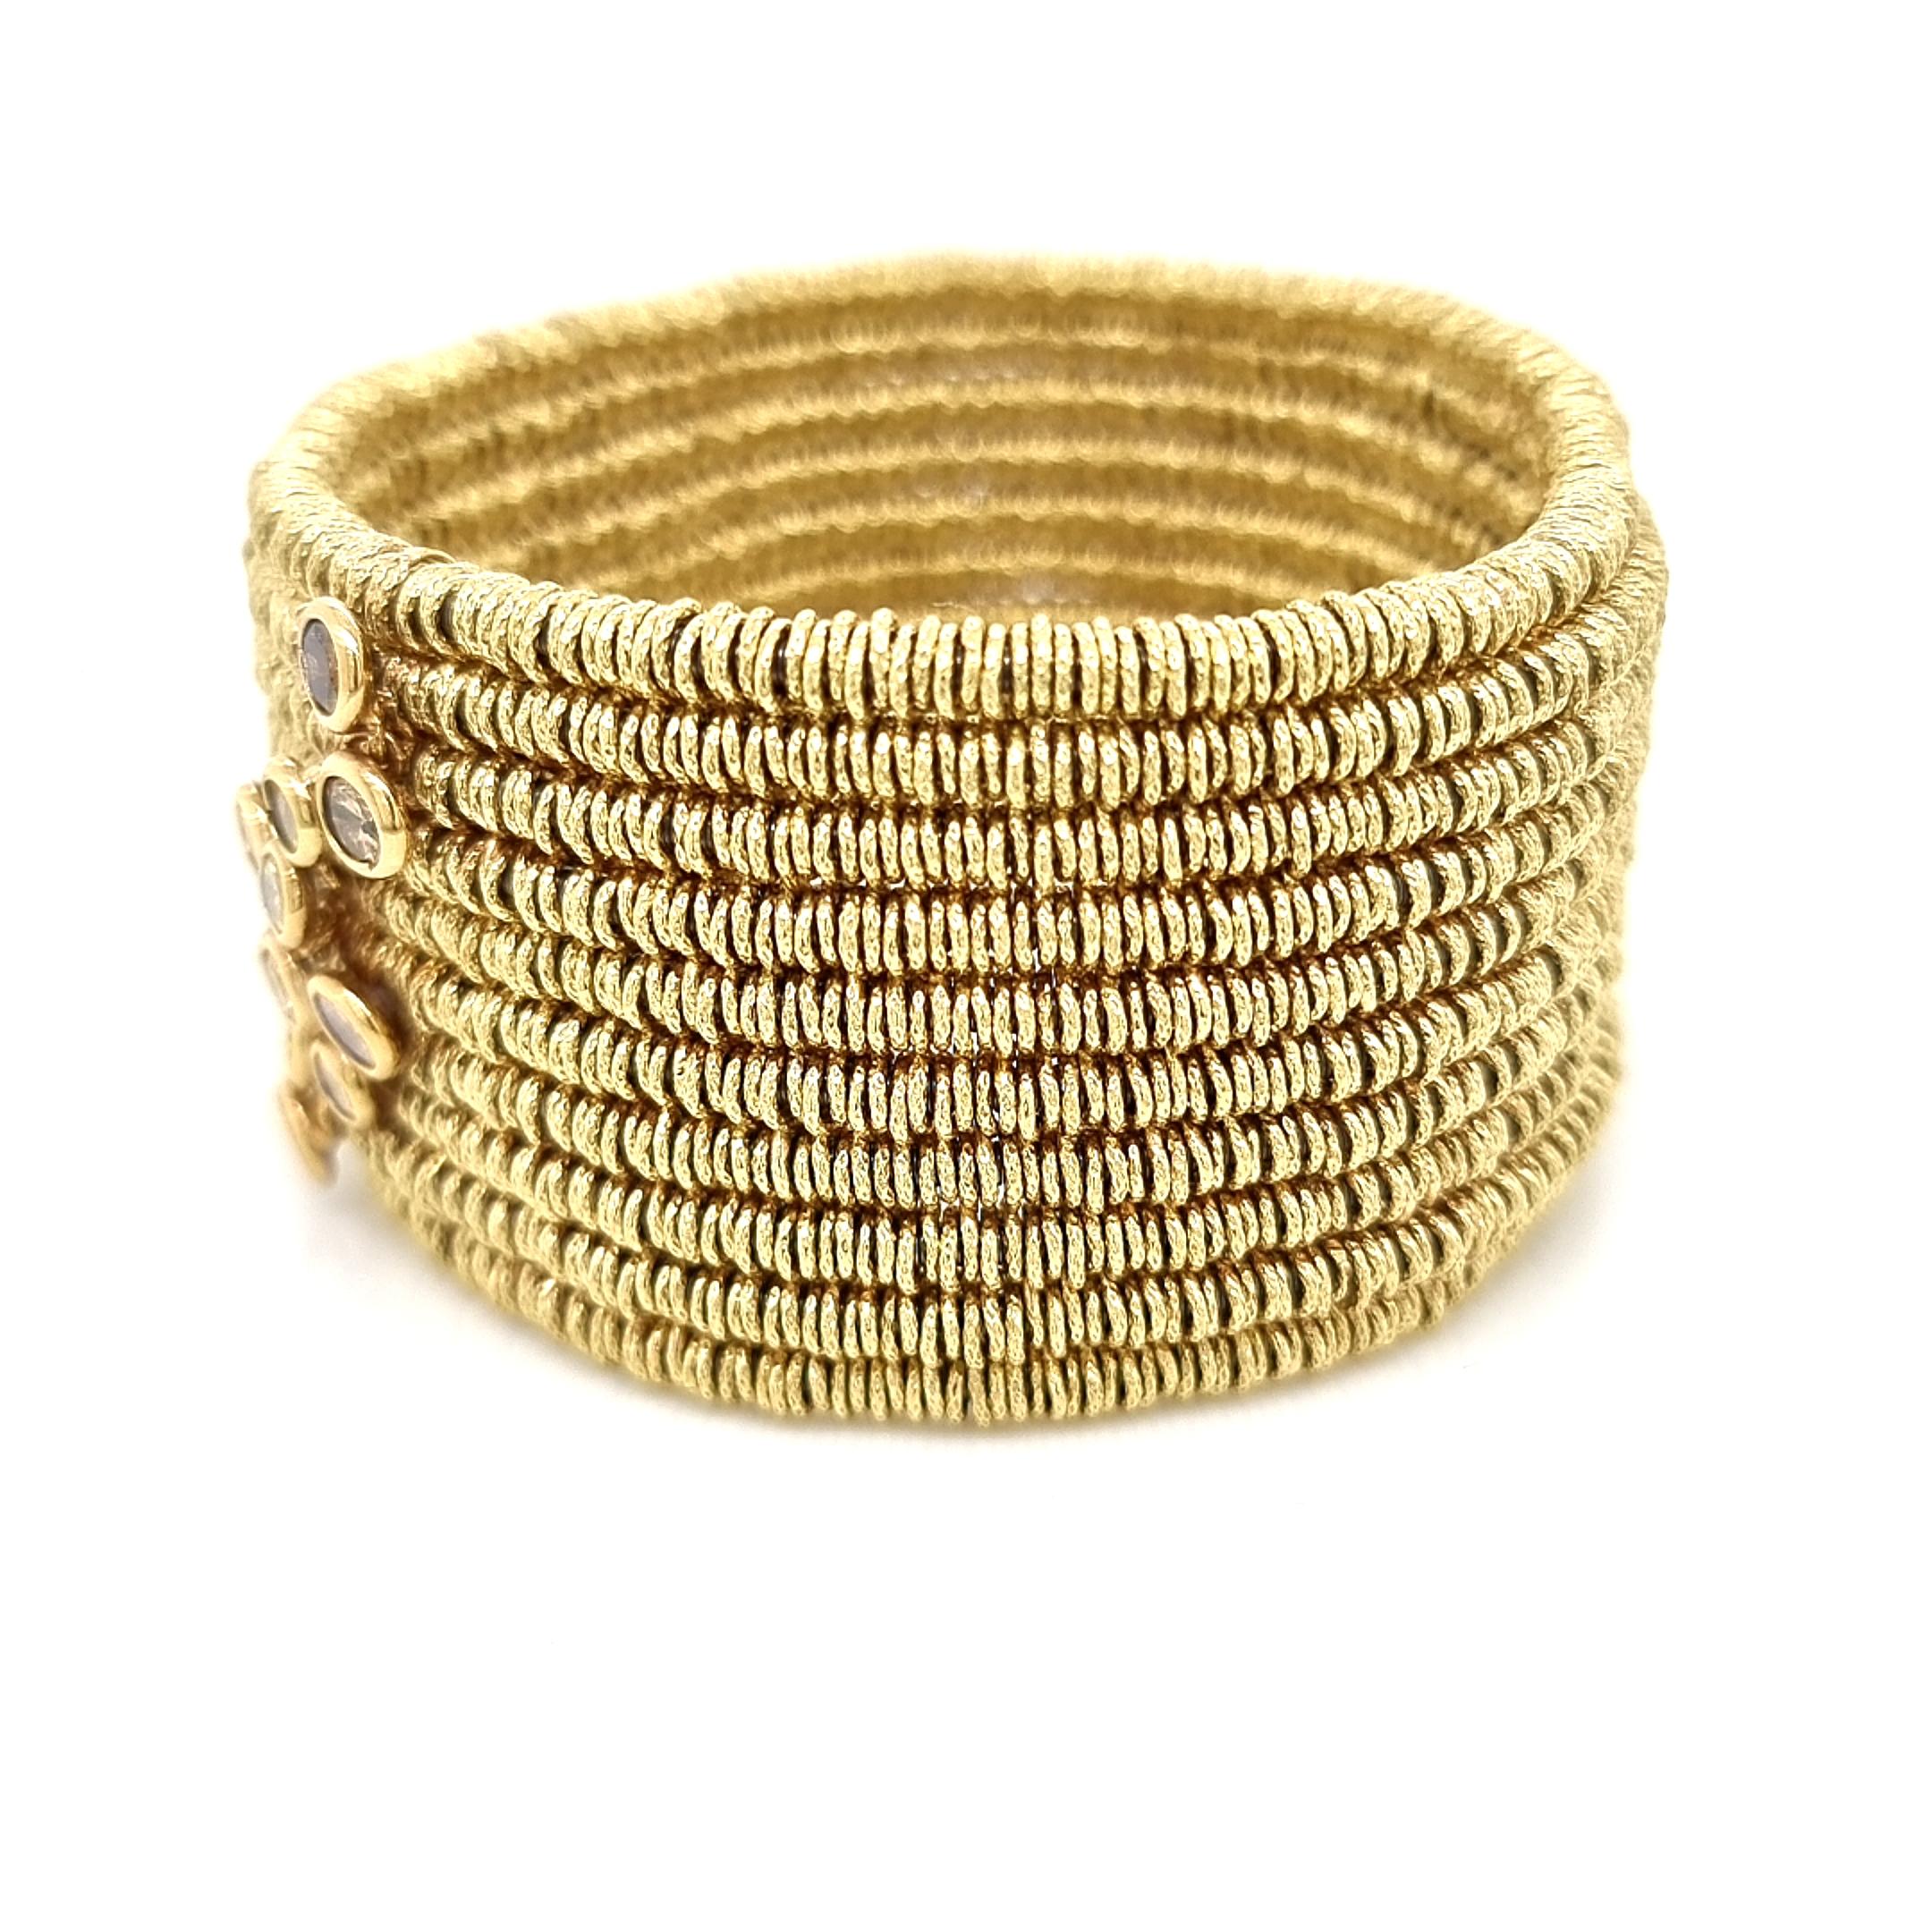 Introducing a sophisticated and contemporary statement piece, the wide bracelet features a fusion of 18K yellow gold and innovative steel spring elements, providing a seamless stretchability for a comfortable fit. An exquisite arrangement of various